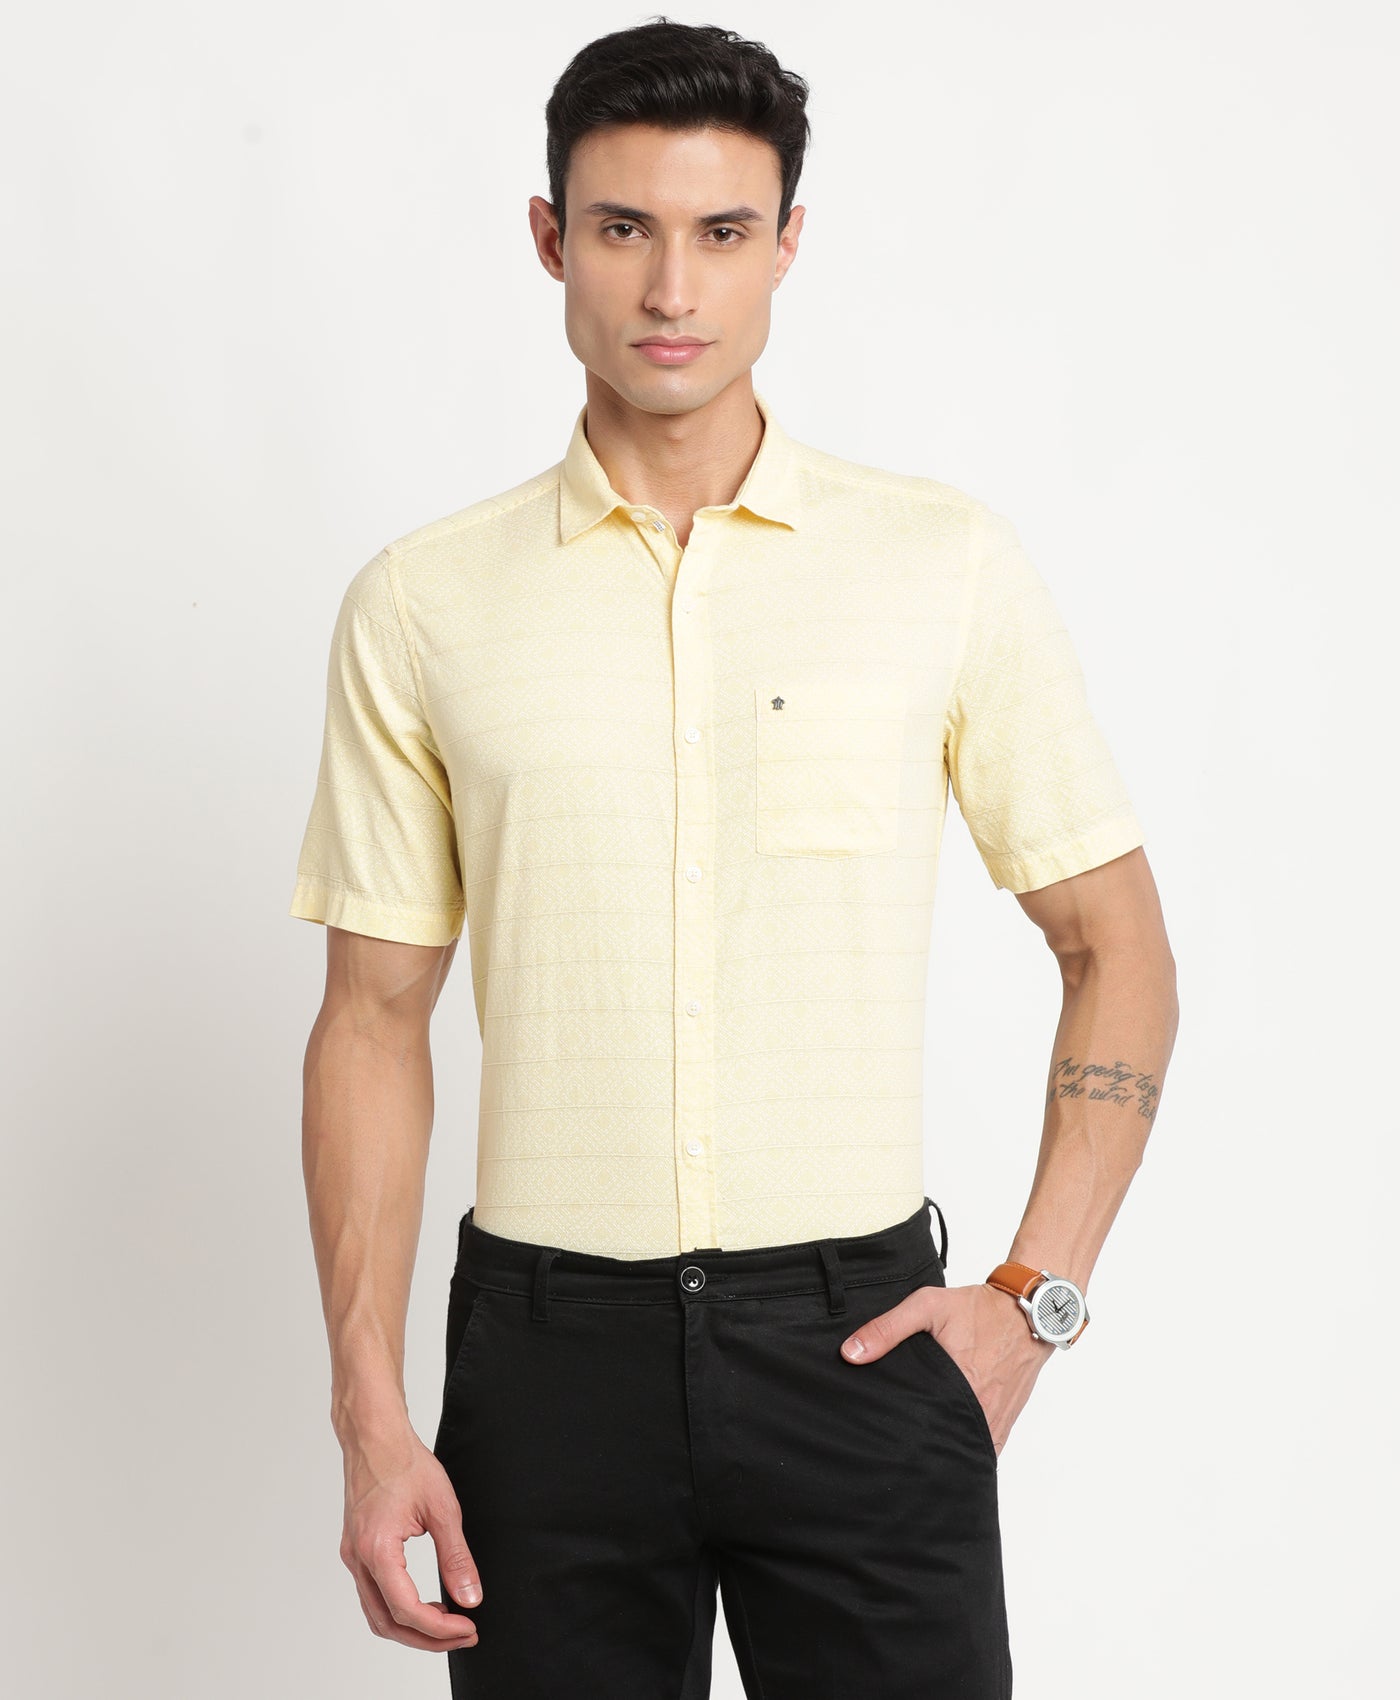 100% Cotton Yellow Printed Slim Fit Full Sleeve Casual Shirt